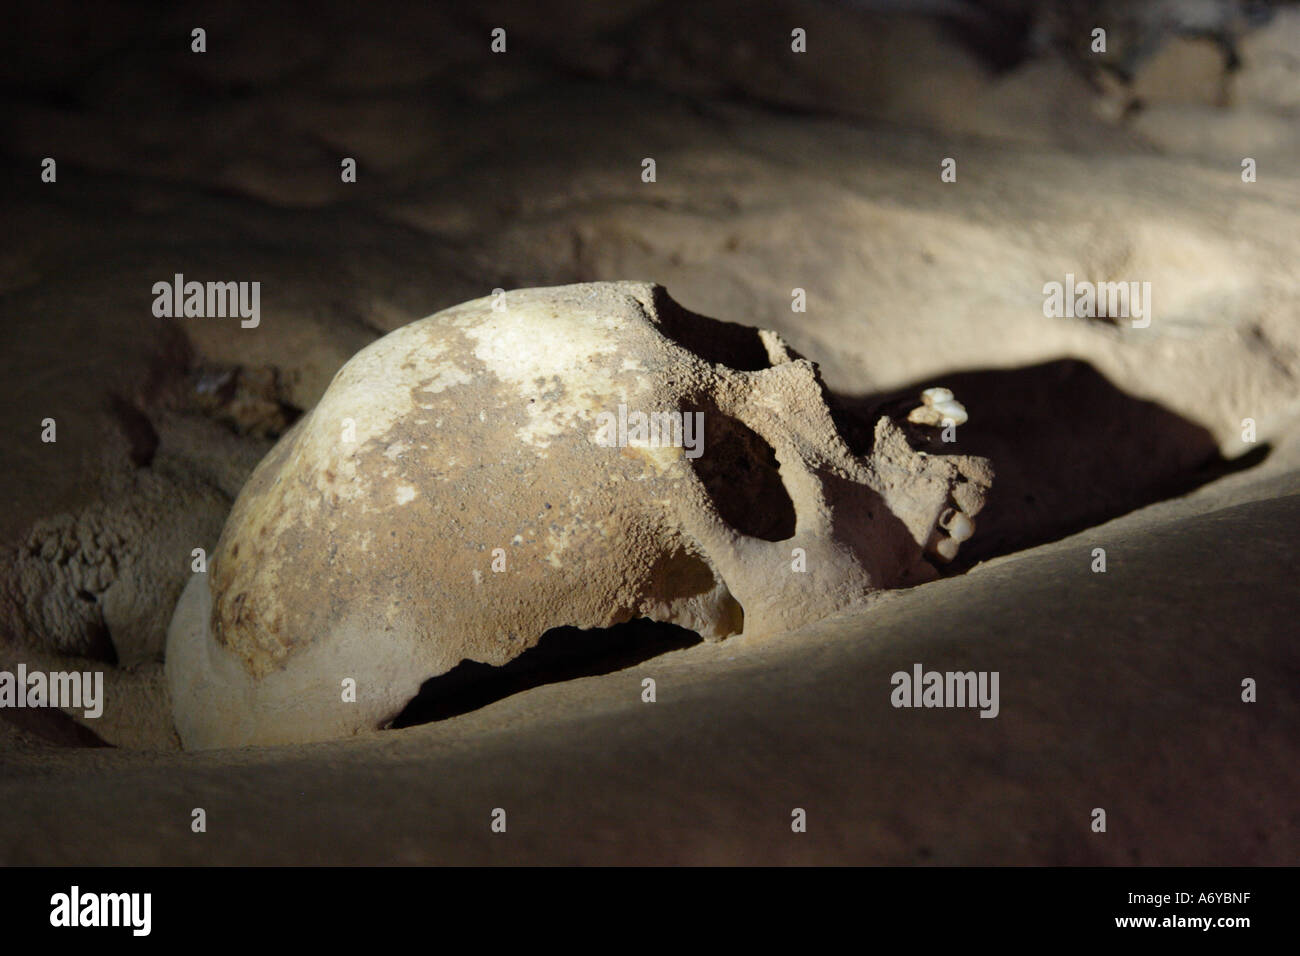 Mayan skull calcified in the floor of a cave in Belize Stock Photo